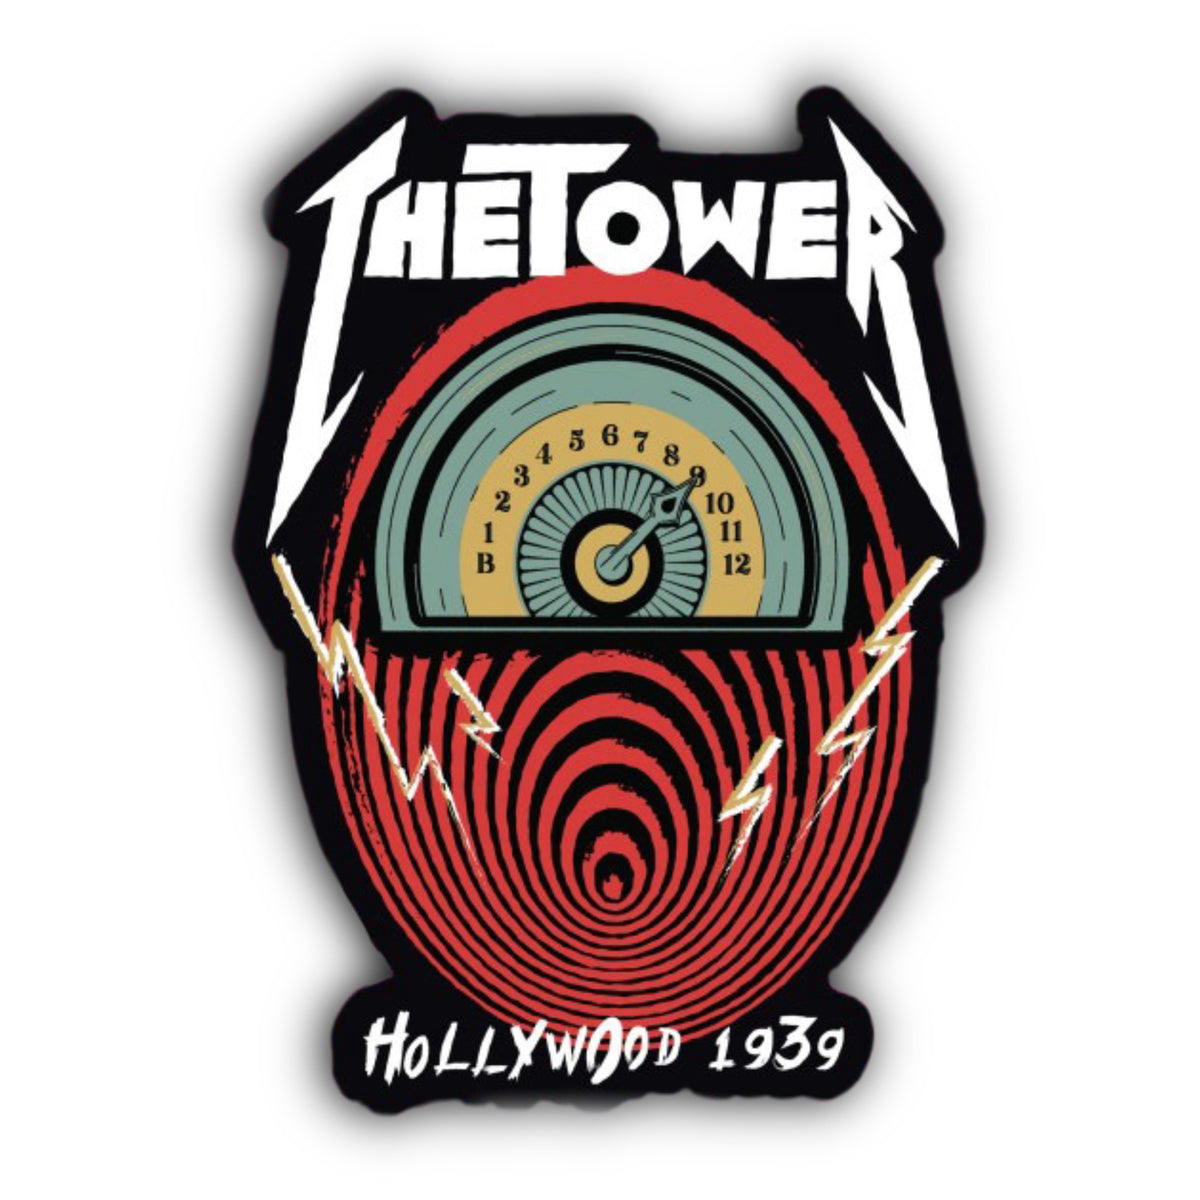 The Tower Tour Sticker